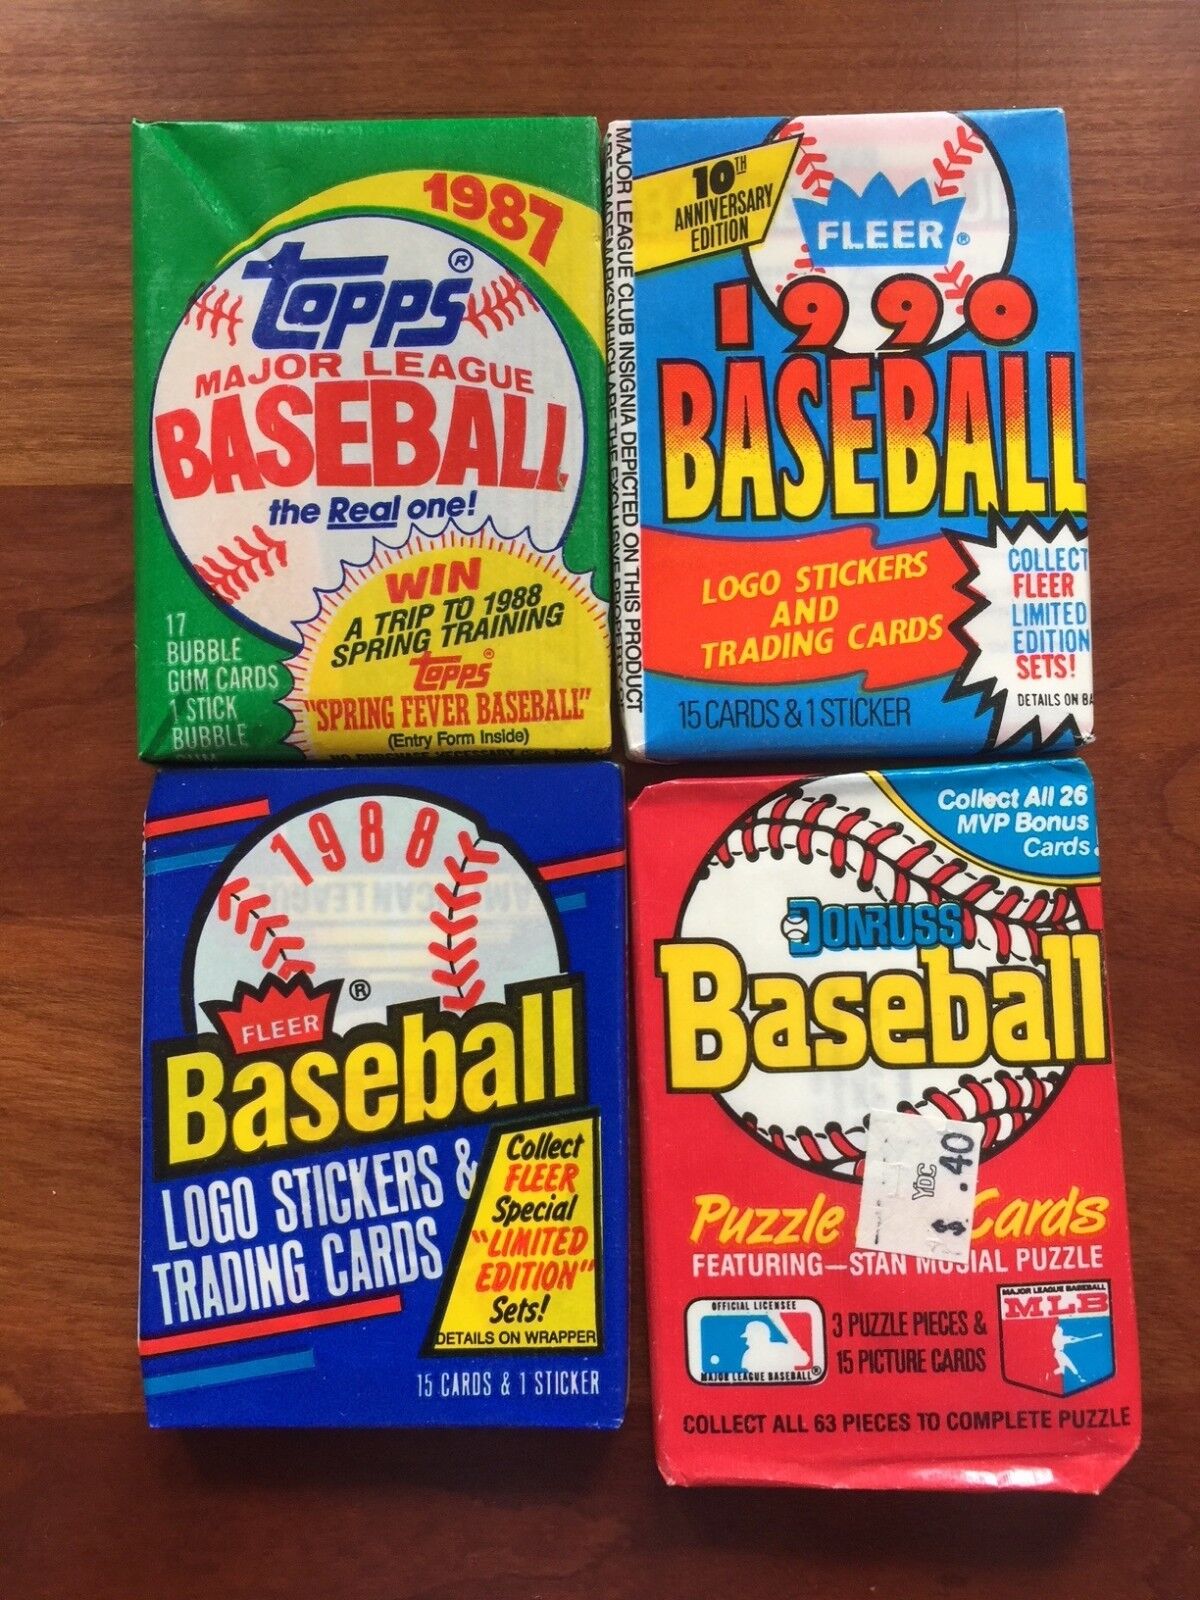 MEGA SIZE LOT OF 1925 OLD UNOPENED BASEBALL CARDS IN PACKS 1990 AND EARLIER